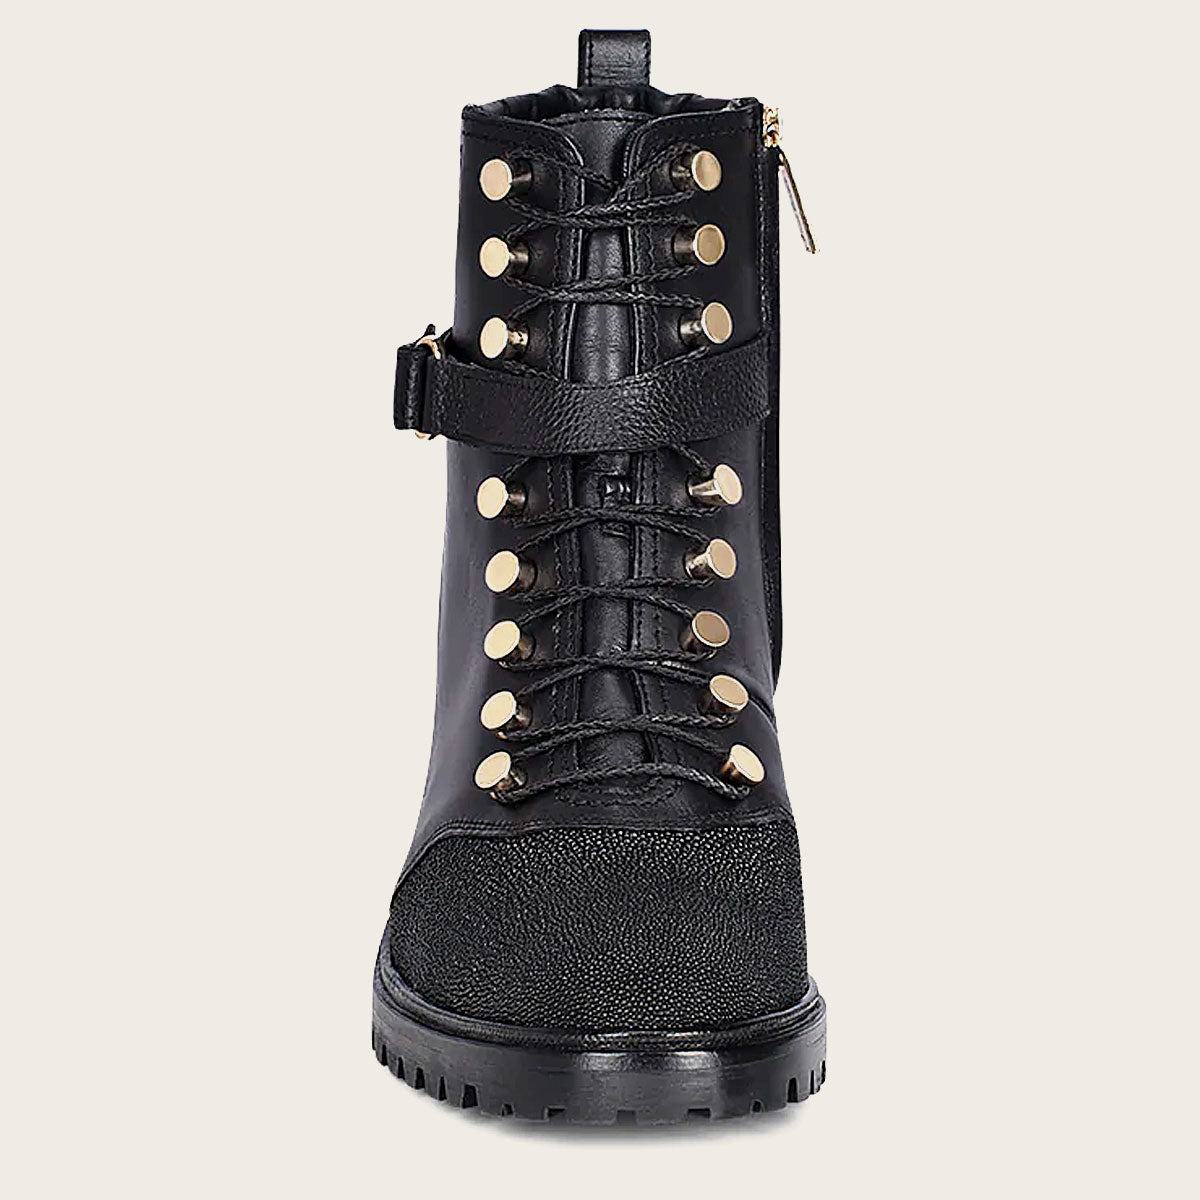 Inca black exotic leather bootie. Elevate your style with these sleek and unique boots. Order now for a bold fashion statement